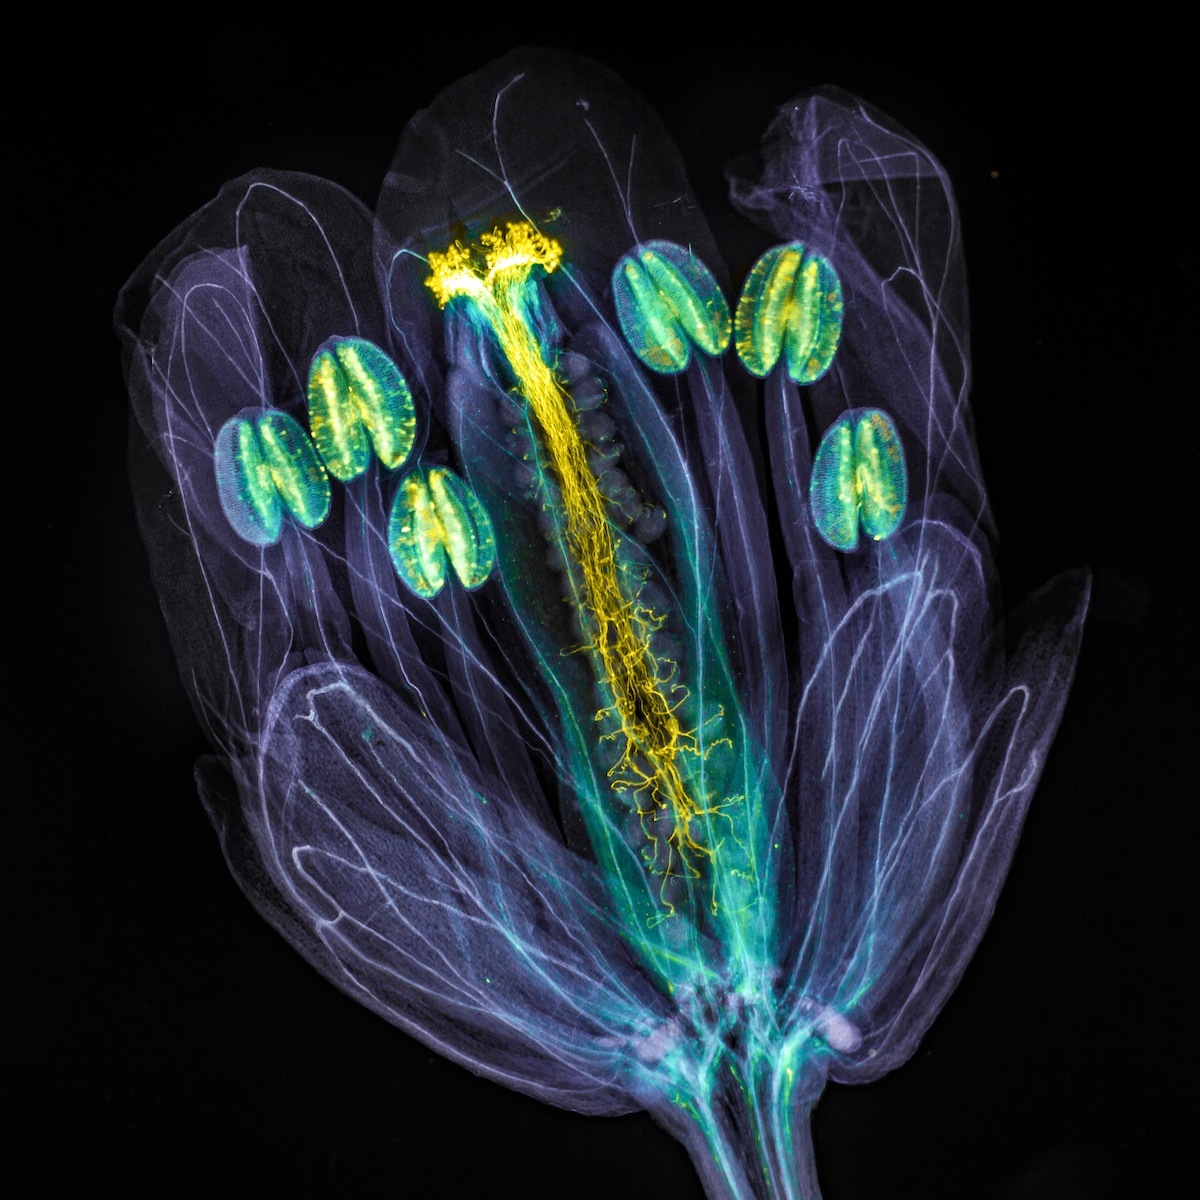 Microscope Photo of Arabidopsis thaliana flower with pollen tubes growing through the pistil